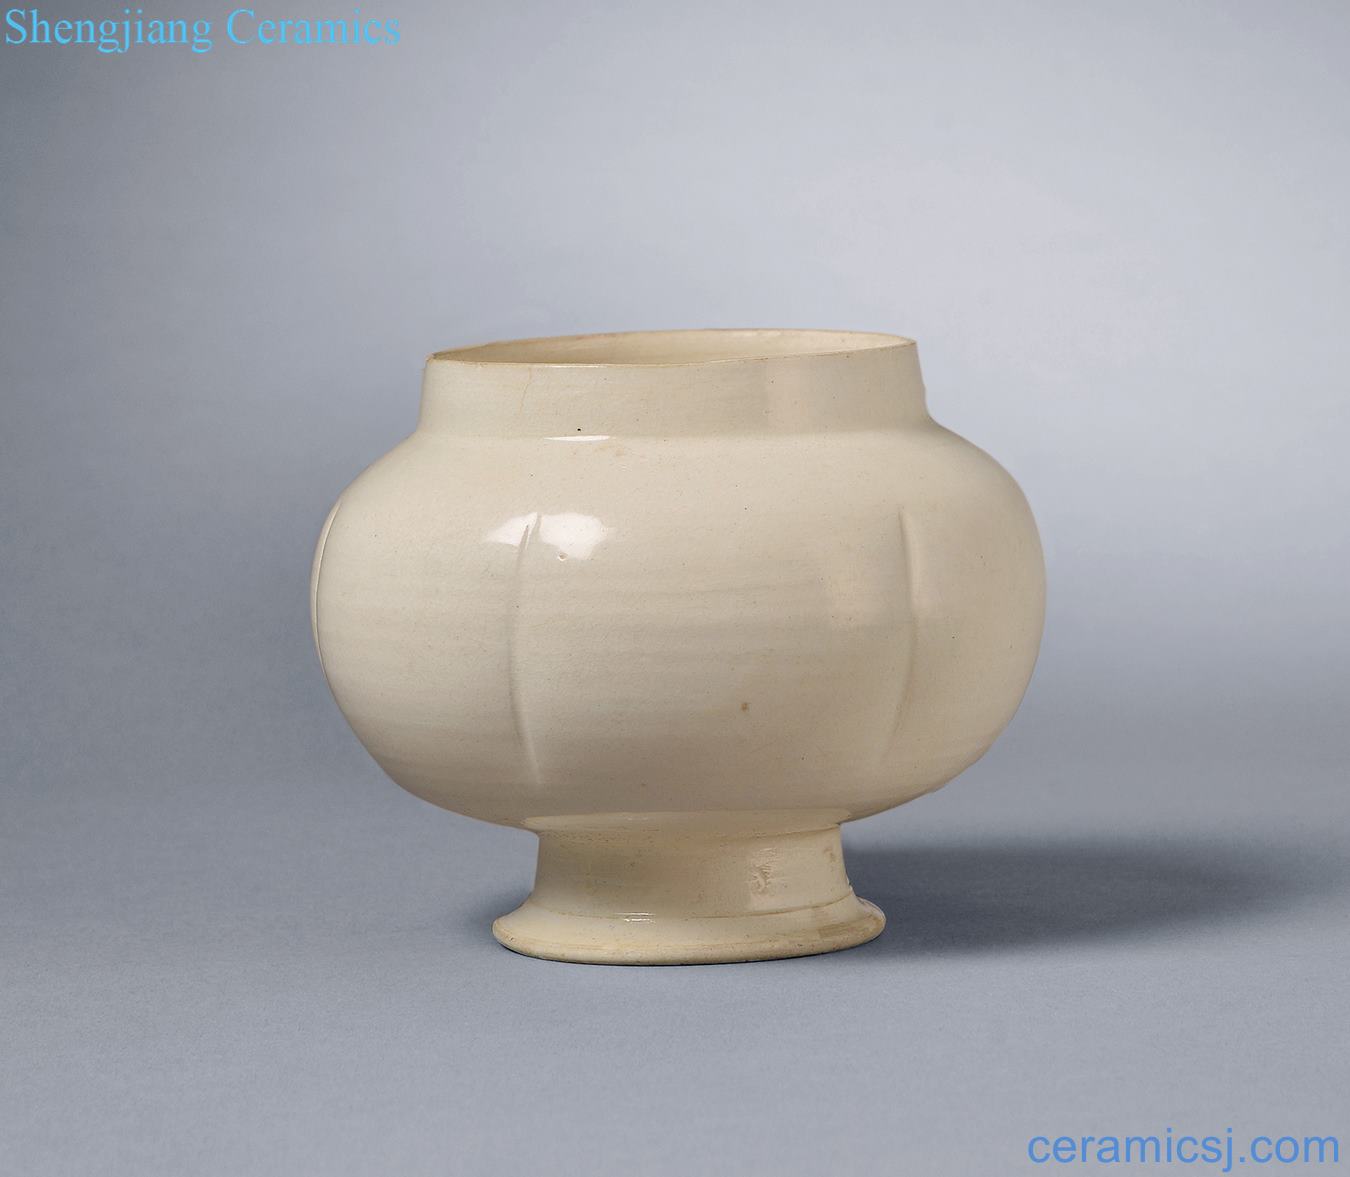 Northern song dynasty - gold - Huo zhou kiln best melon leng, cans